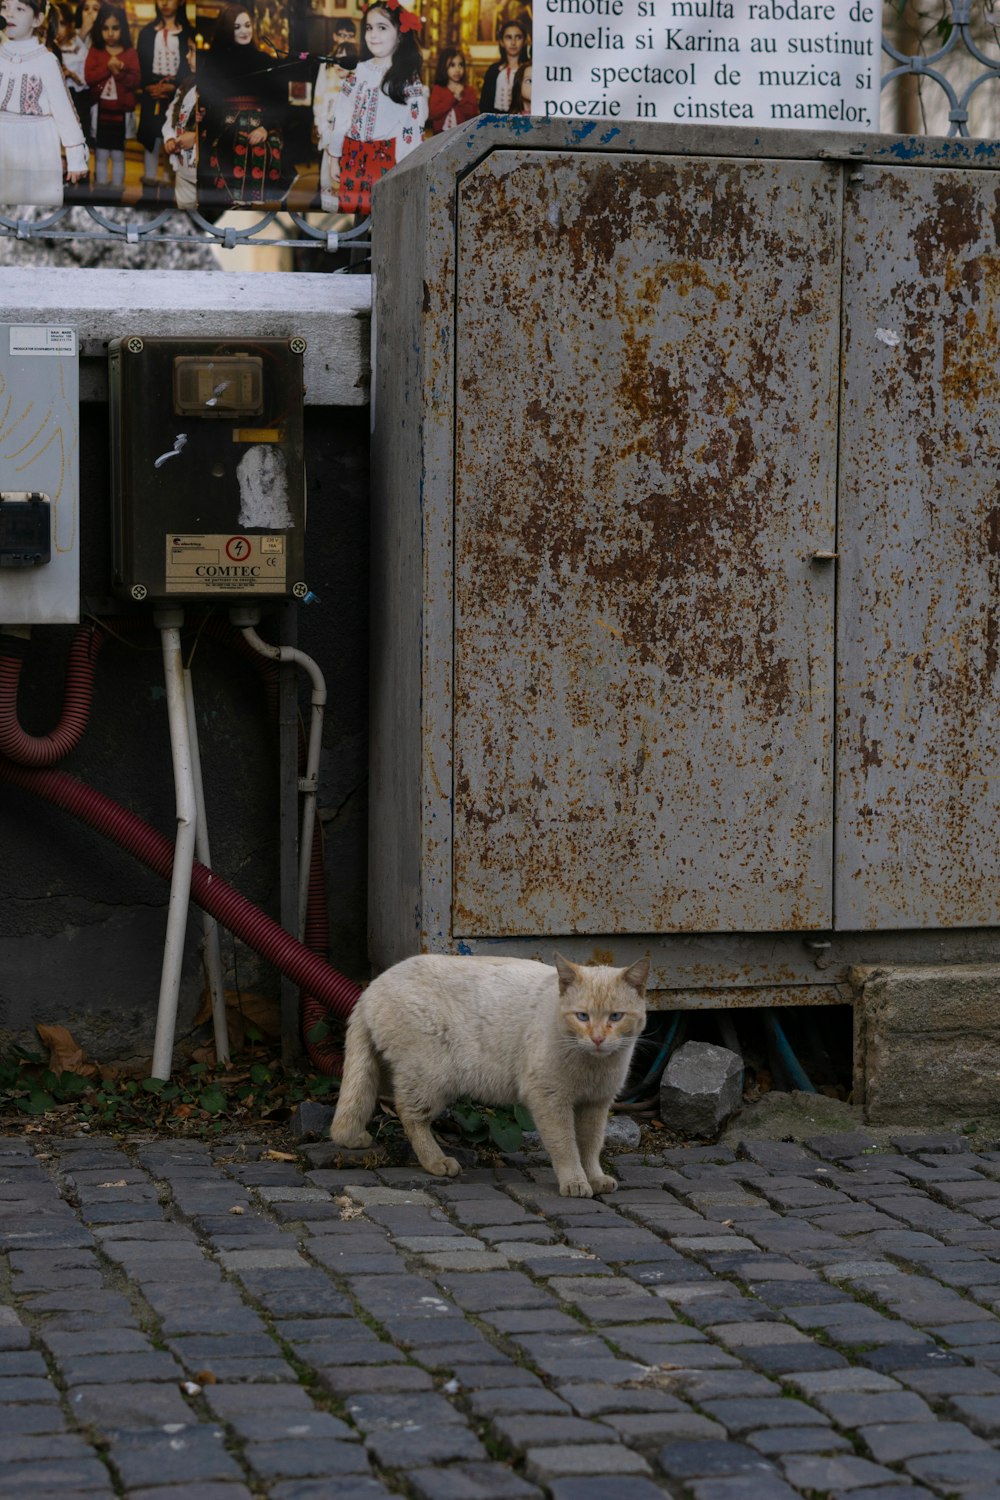 a white cat standing next to a rusted metal box